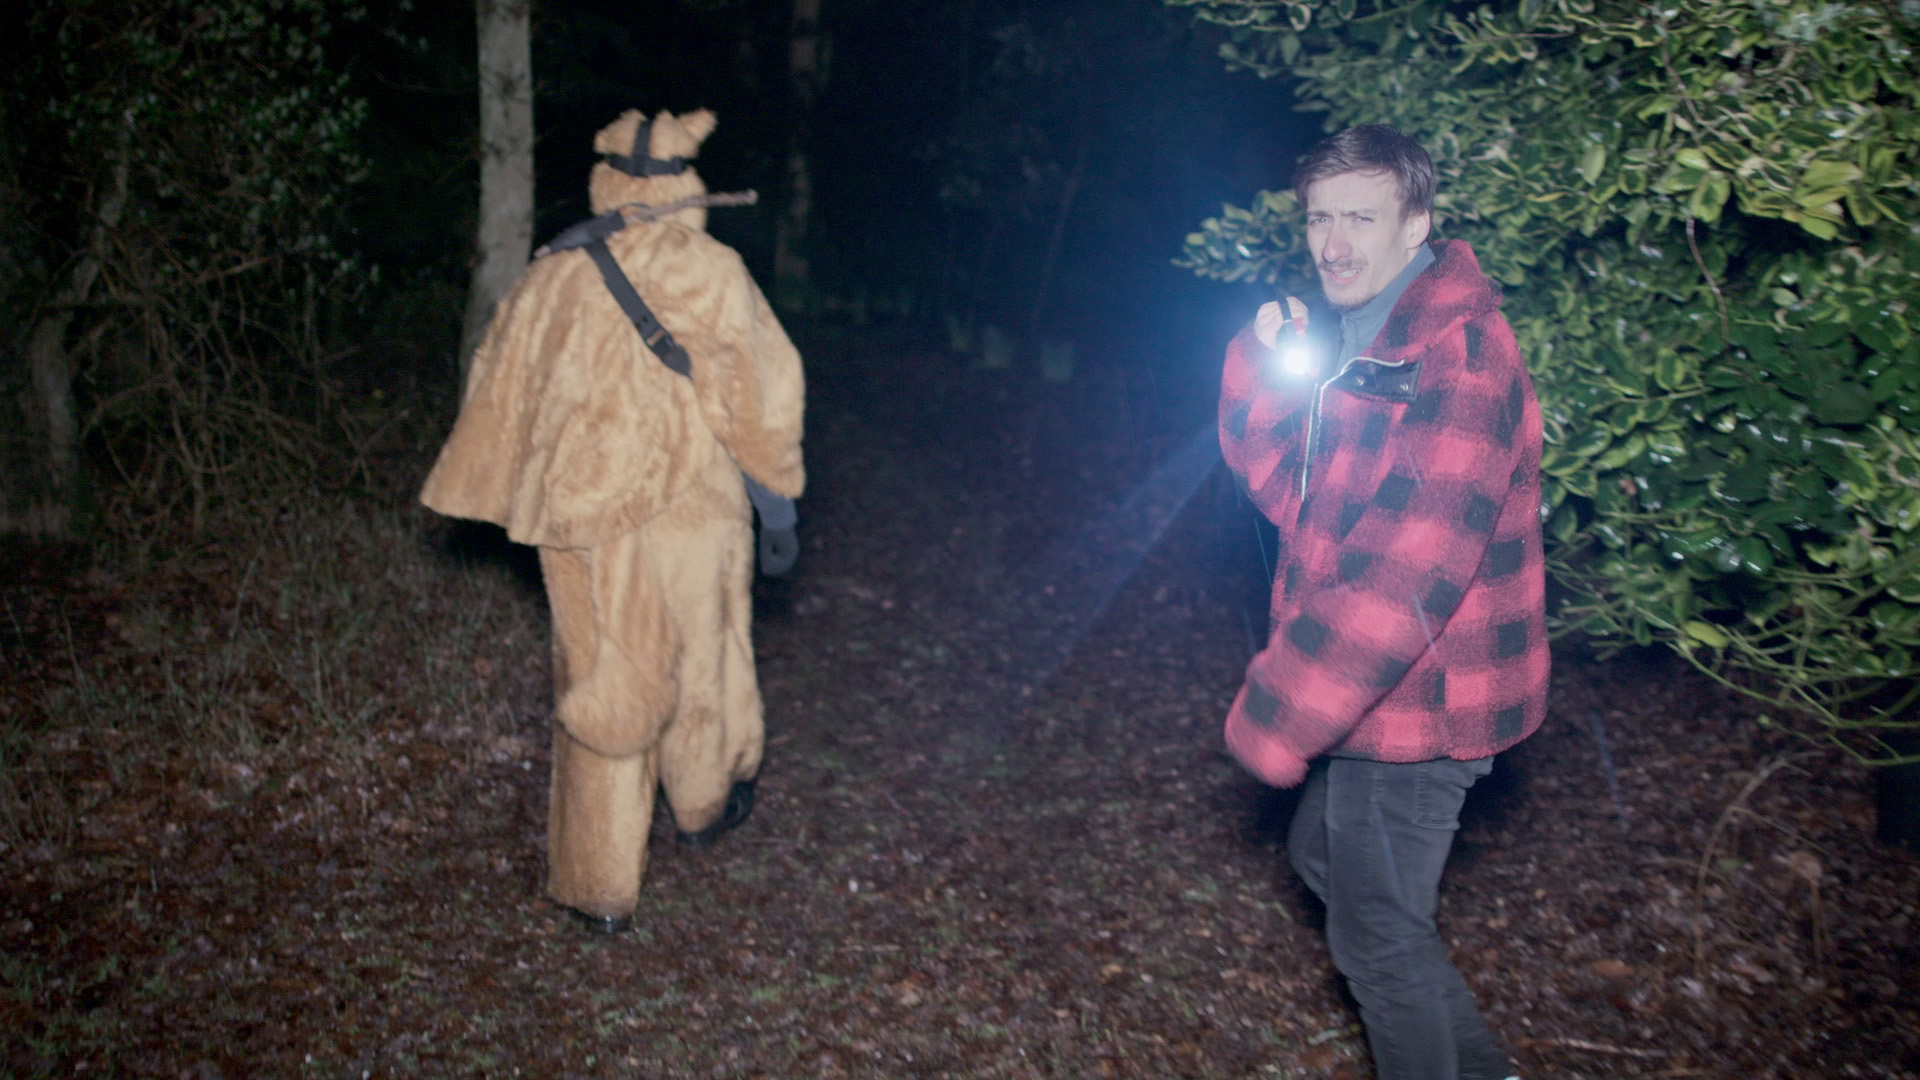 Image link to filmmaking showreel showing a plethora of work by Jack McKenna. Image shows two characters walking through a wooded area at night with a flashlight